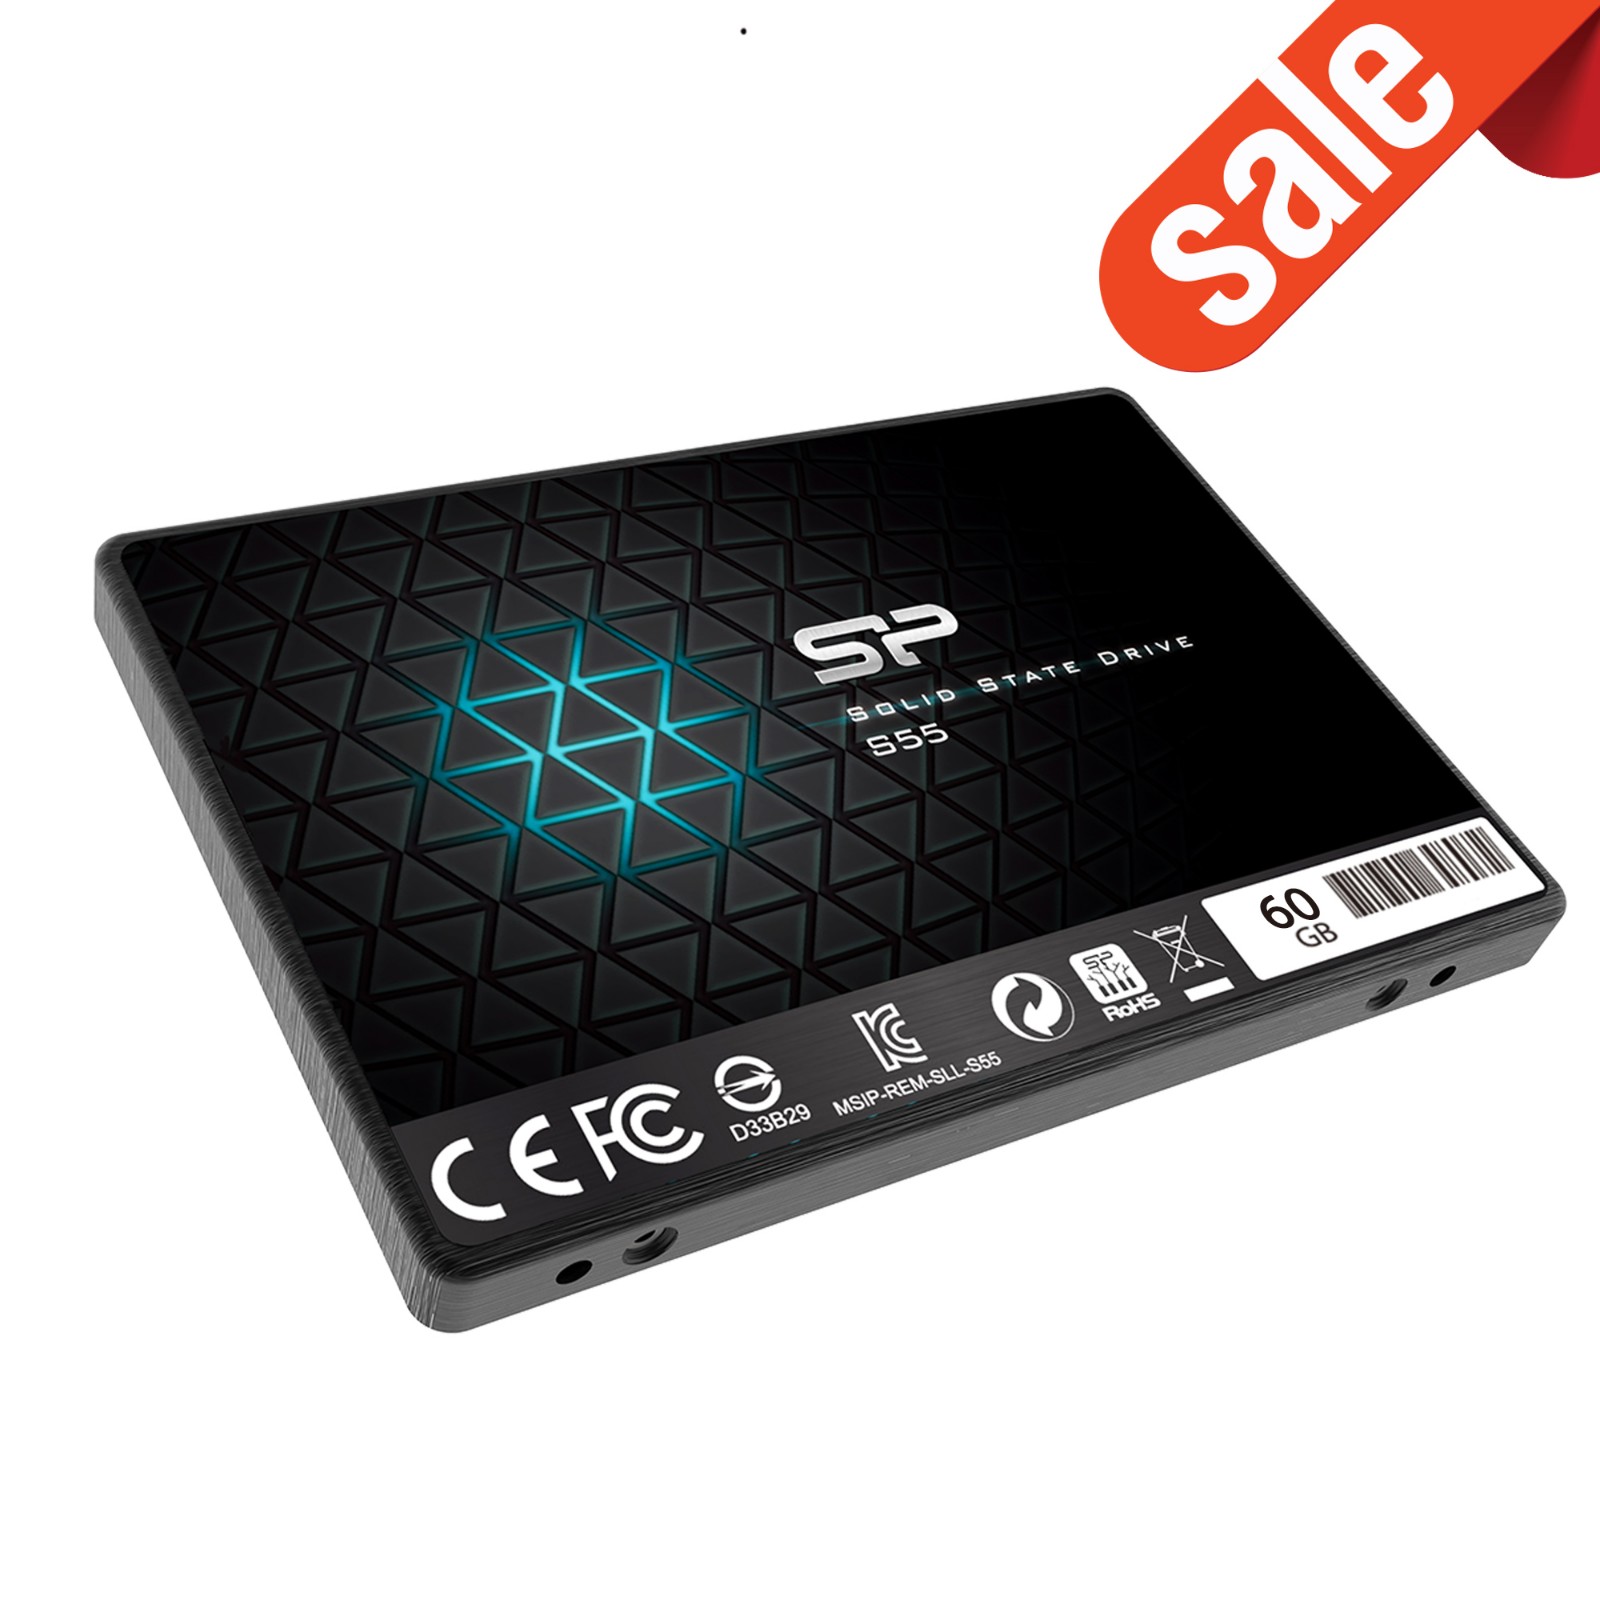 Silicon Power 60GB S55 SSD